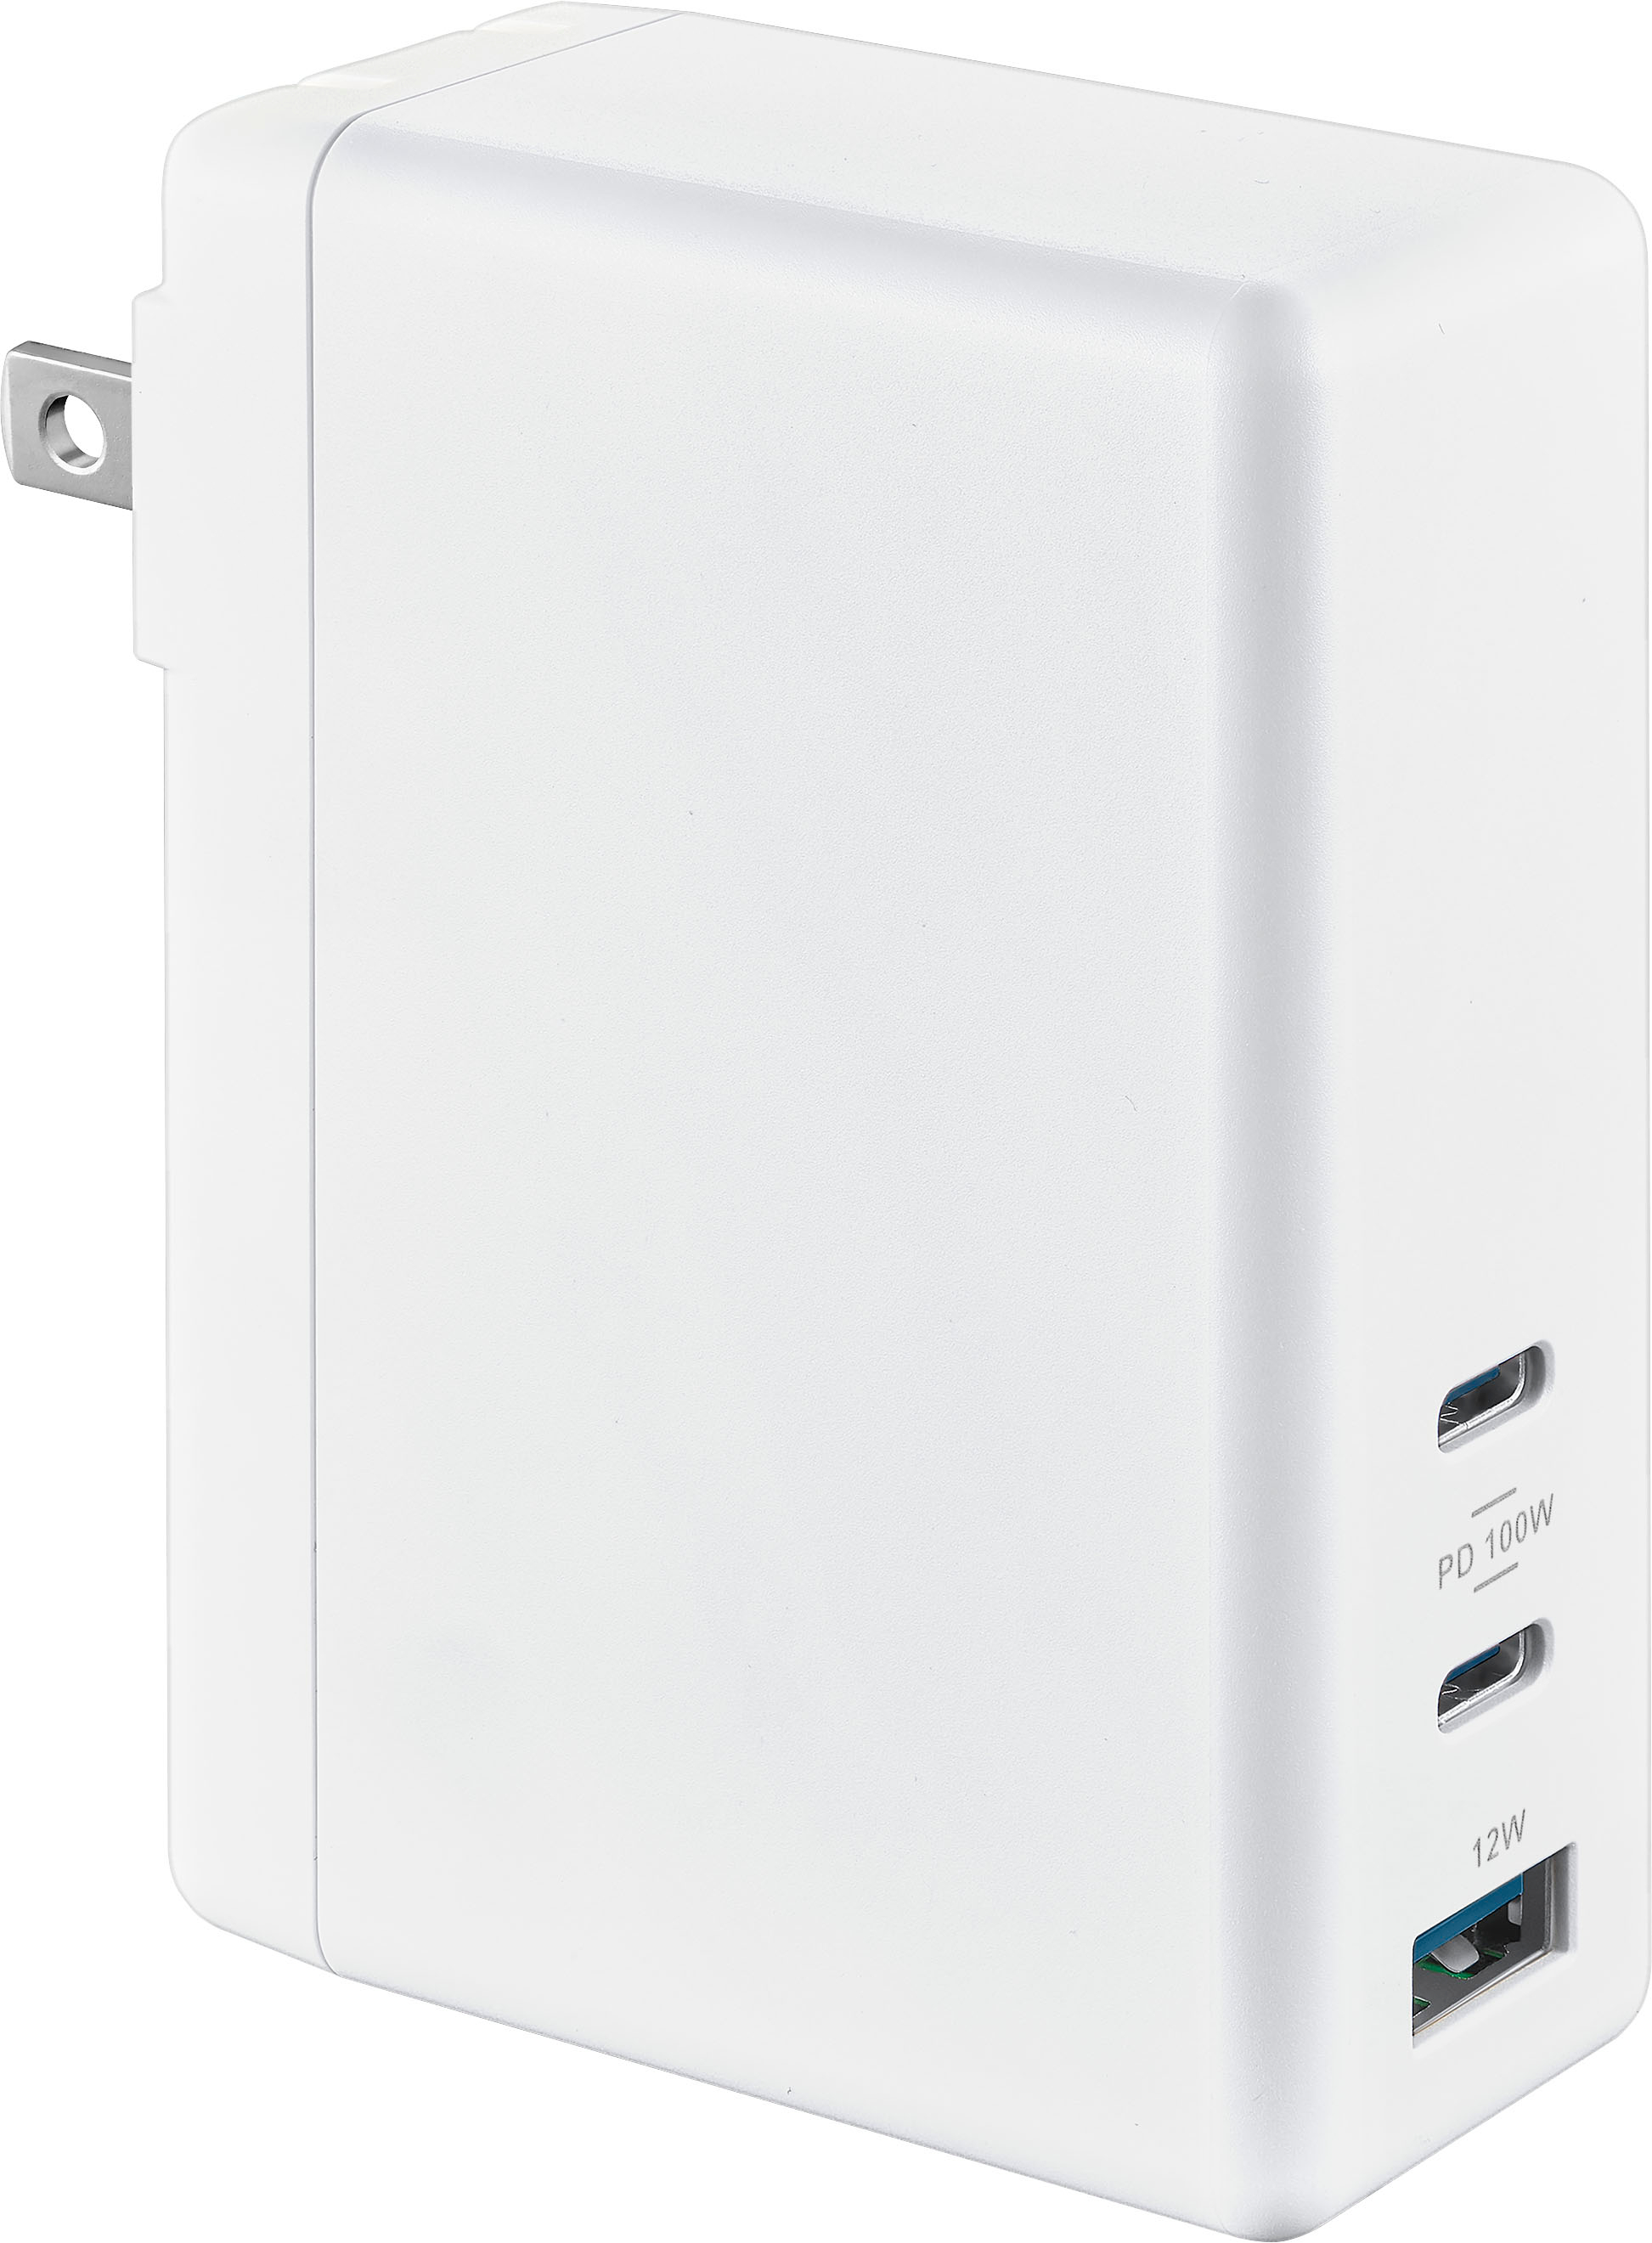 Insignia - 112W Wall Charger with 2 USB-C and 1 USB Port - White